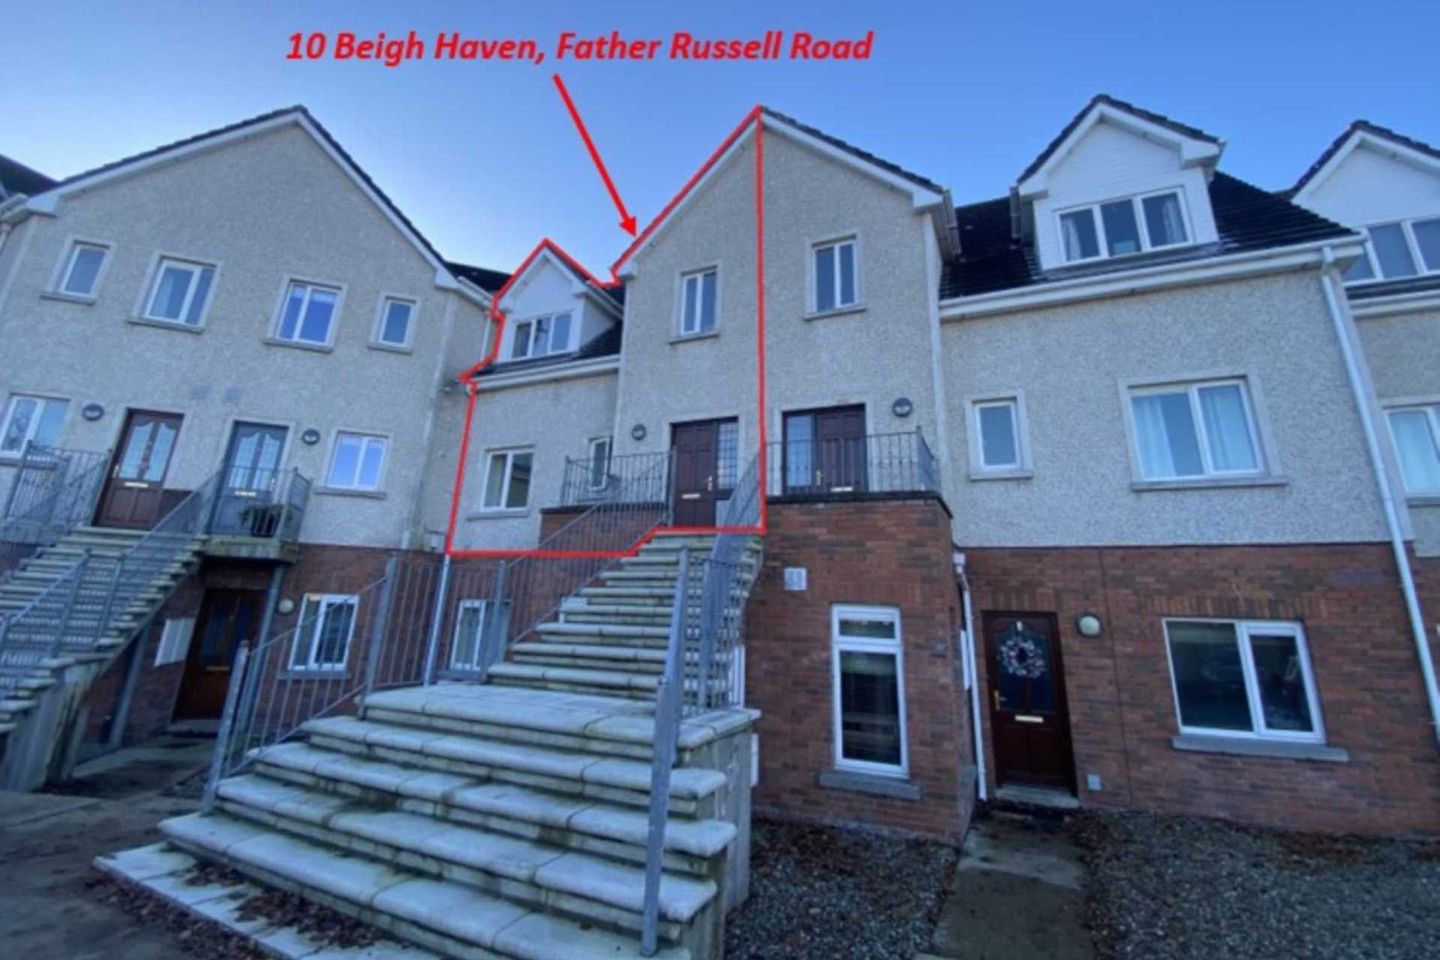 10 Beigh Haven, Father Russell Road, Limerick, Dooradoyle, Co. Limerick, V94HV20